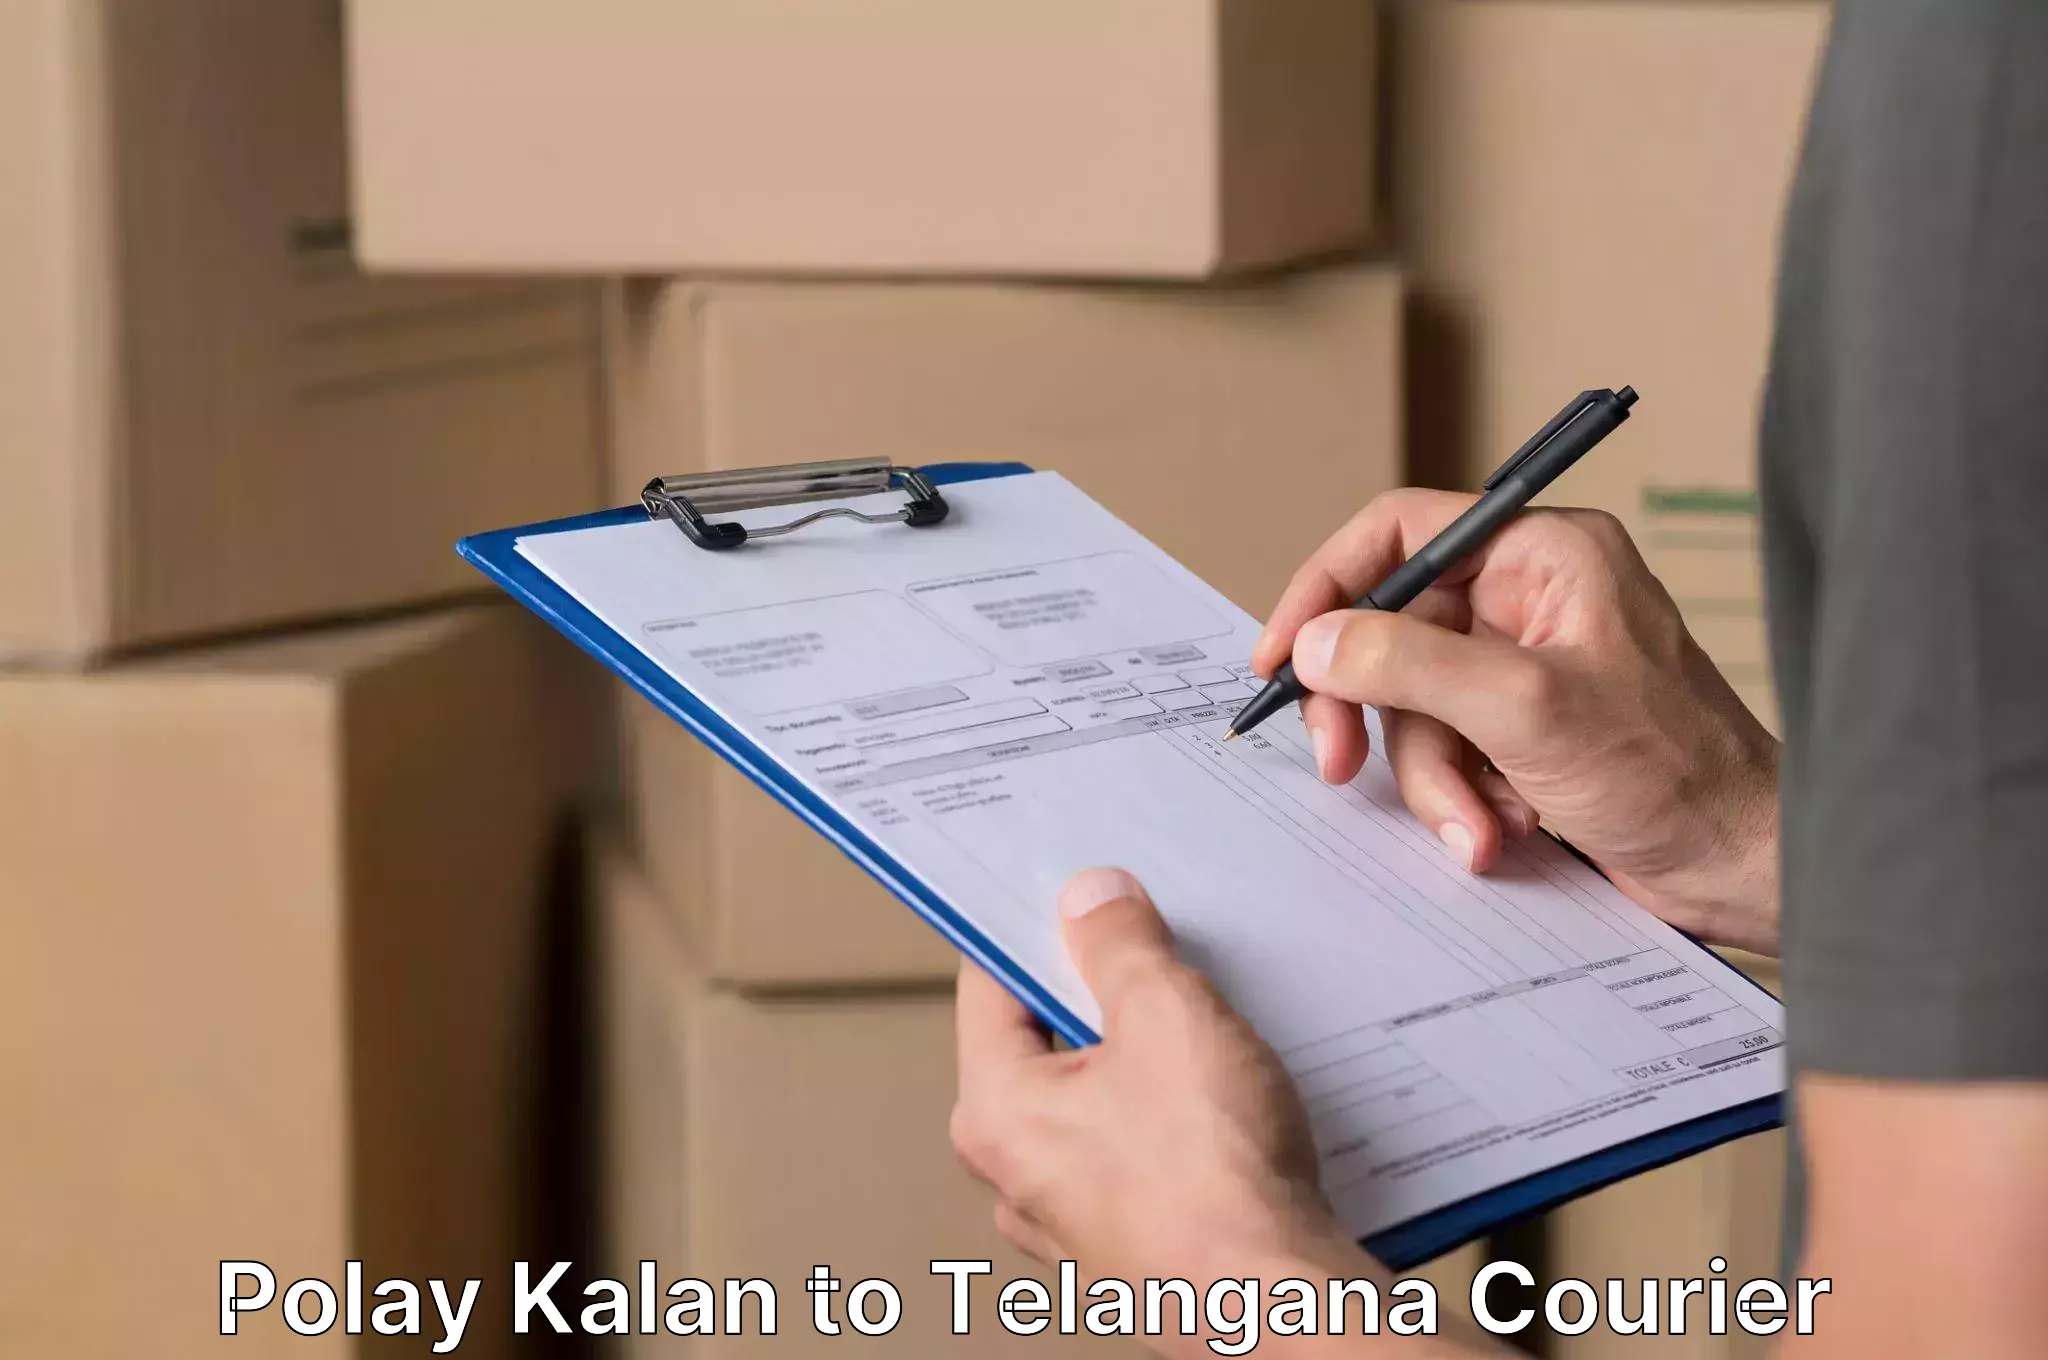 Quality relocation services in Polay Kalan to Siddipet